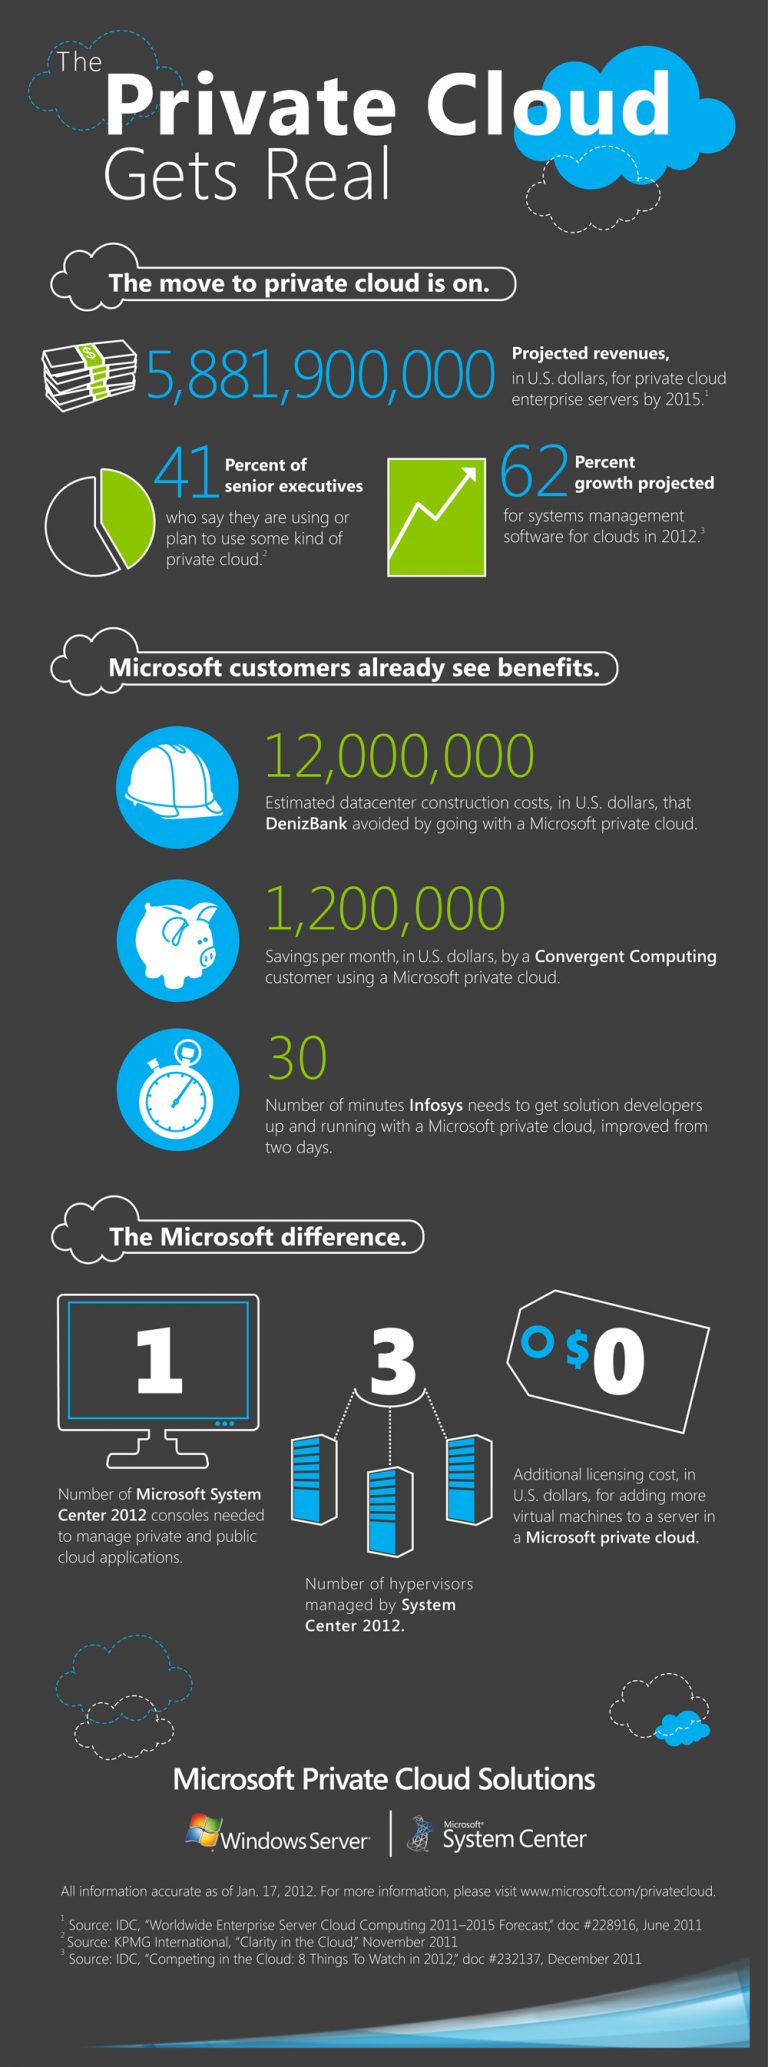 The move to private cloud is on, and Microsoft is taking customers there with System Center 2012.